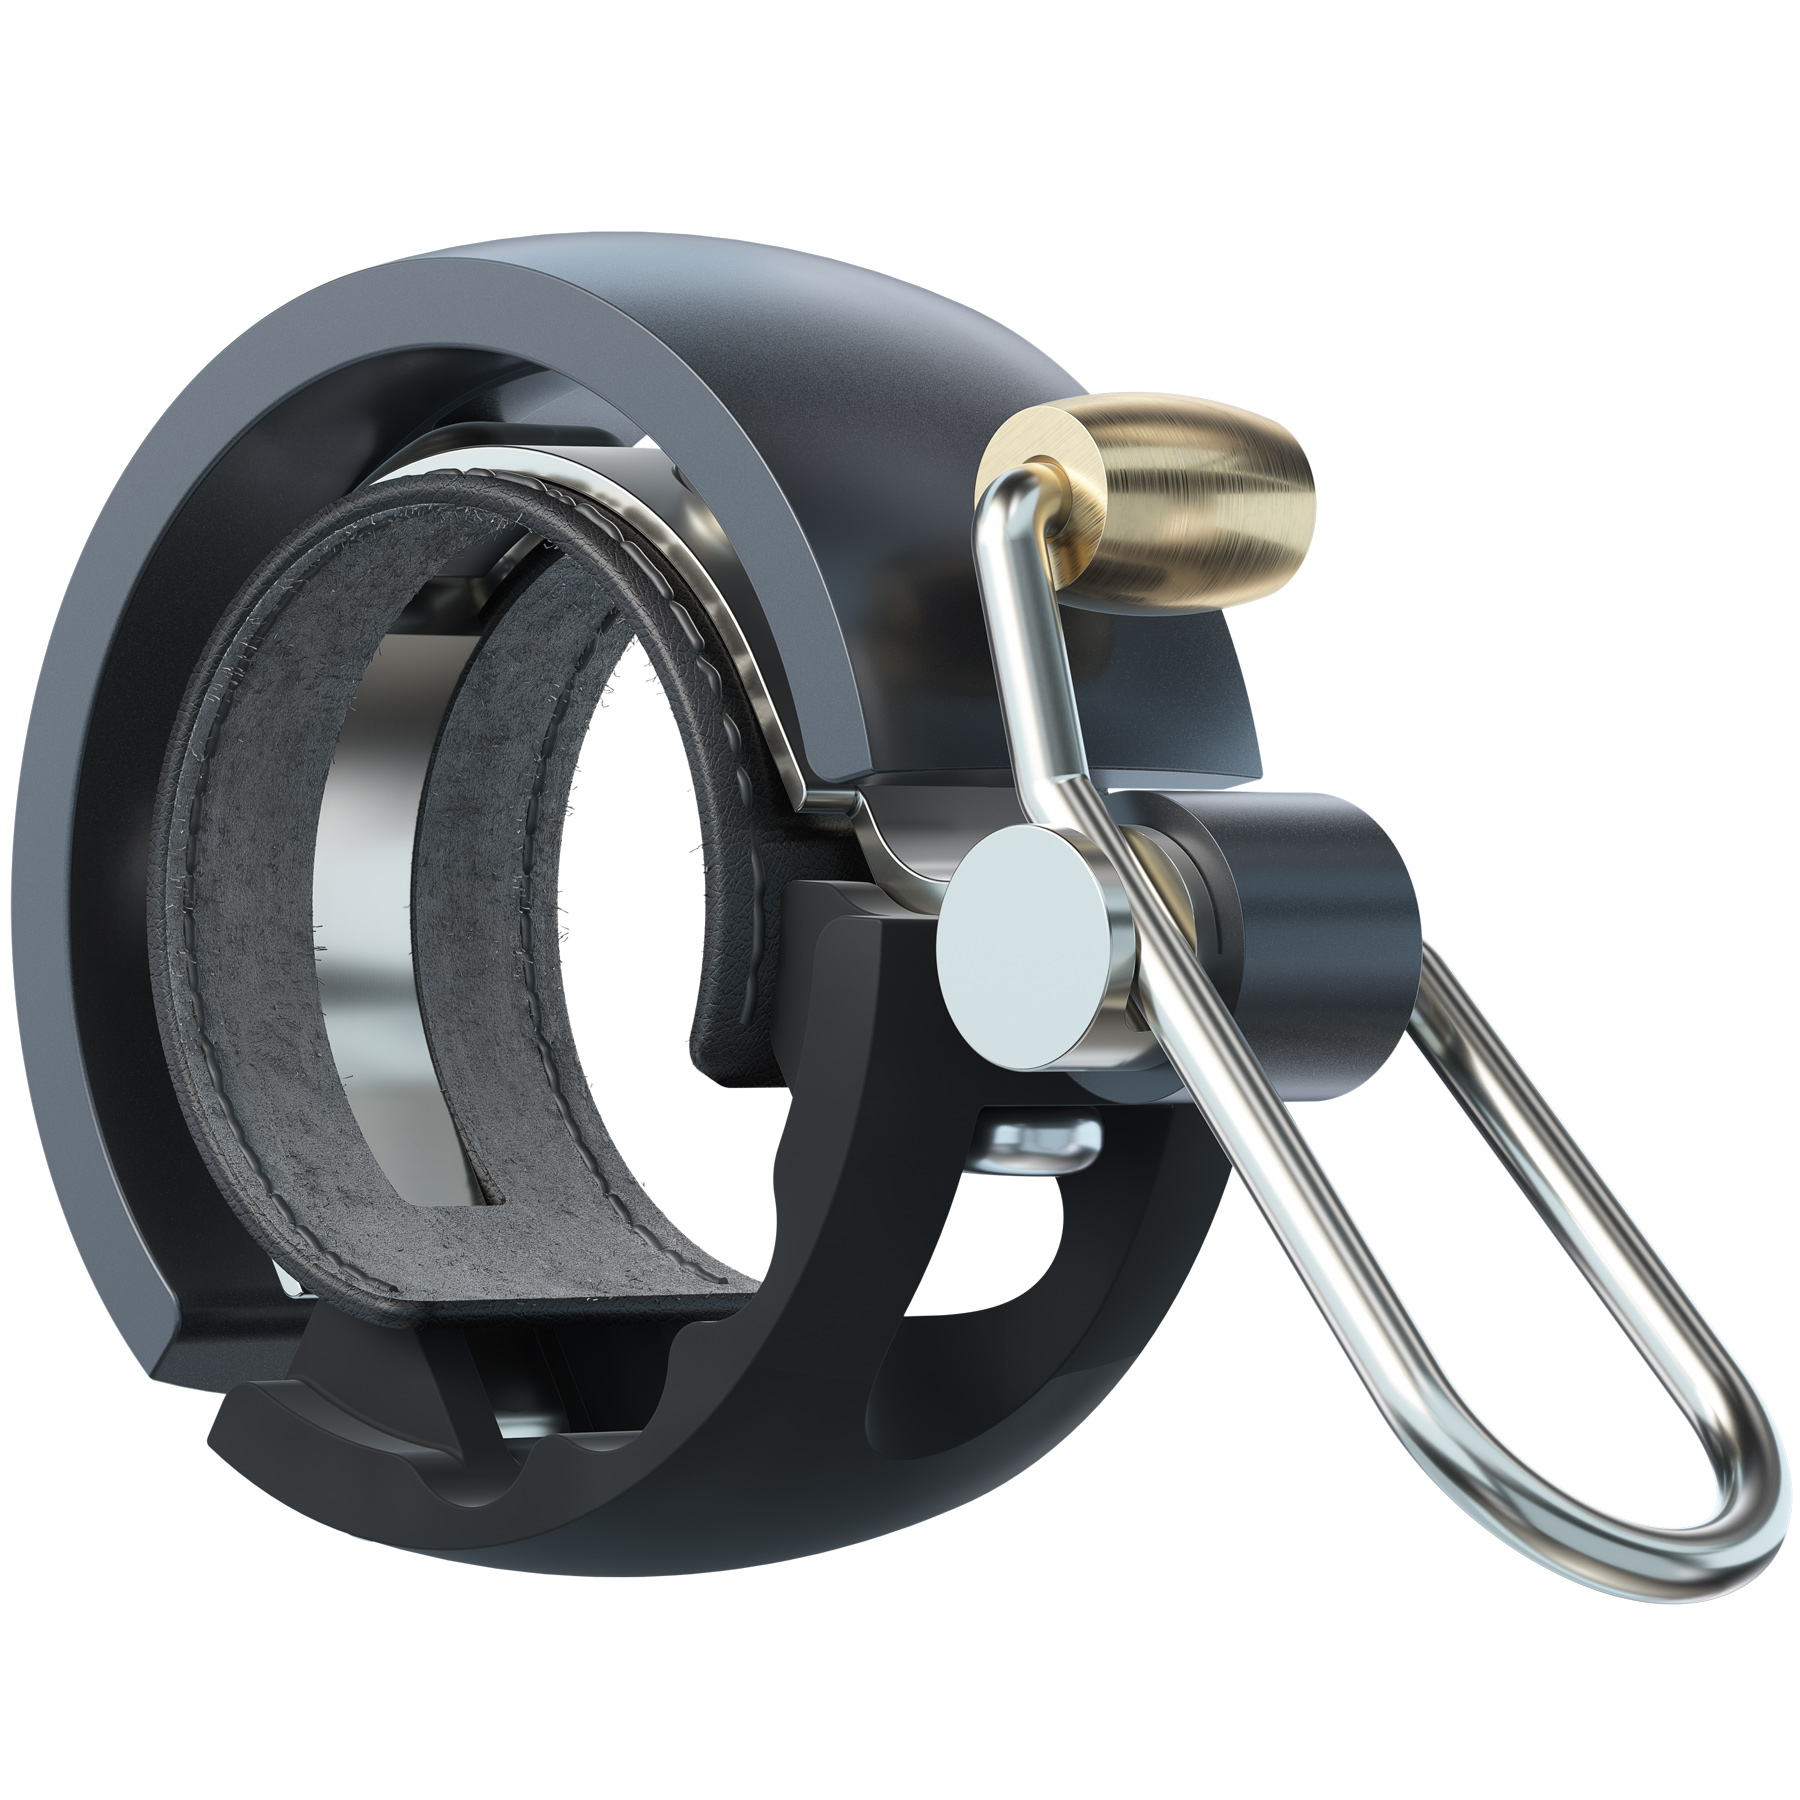 Picture of Knog Oi Luxe Bell - black/grey